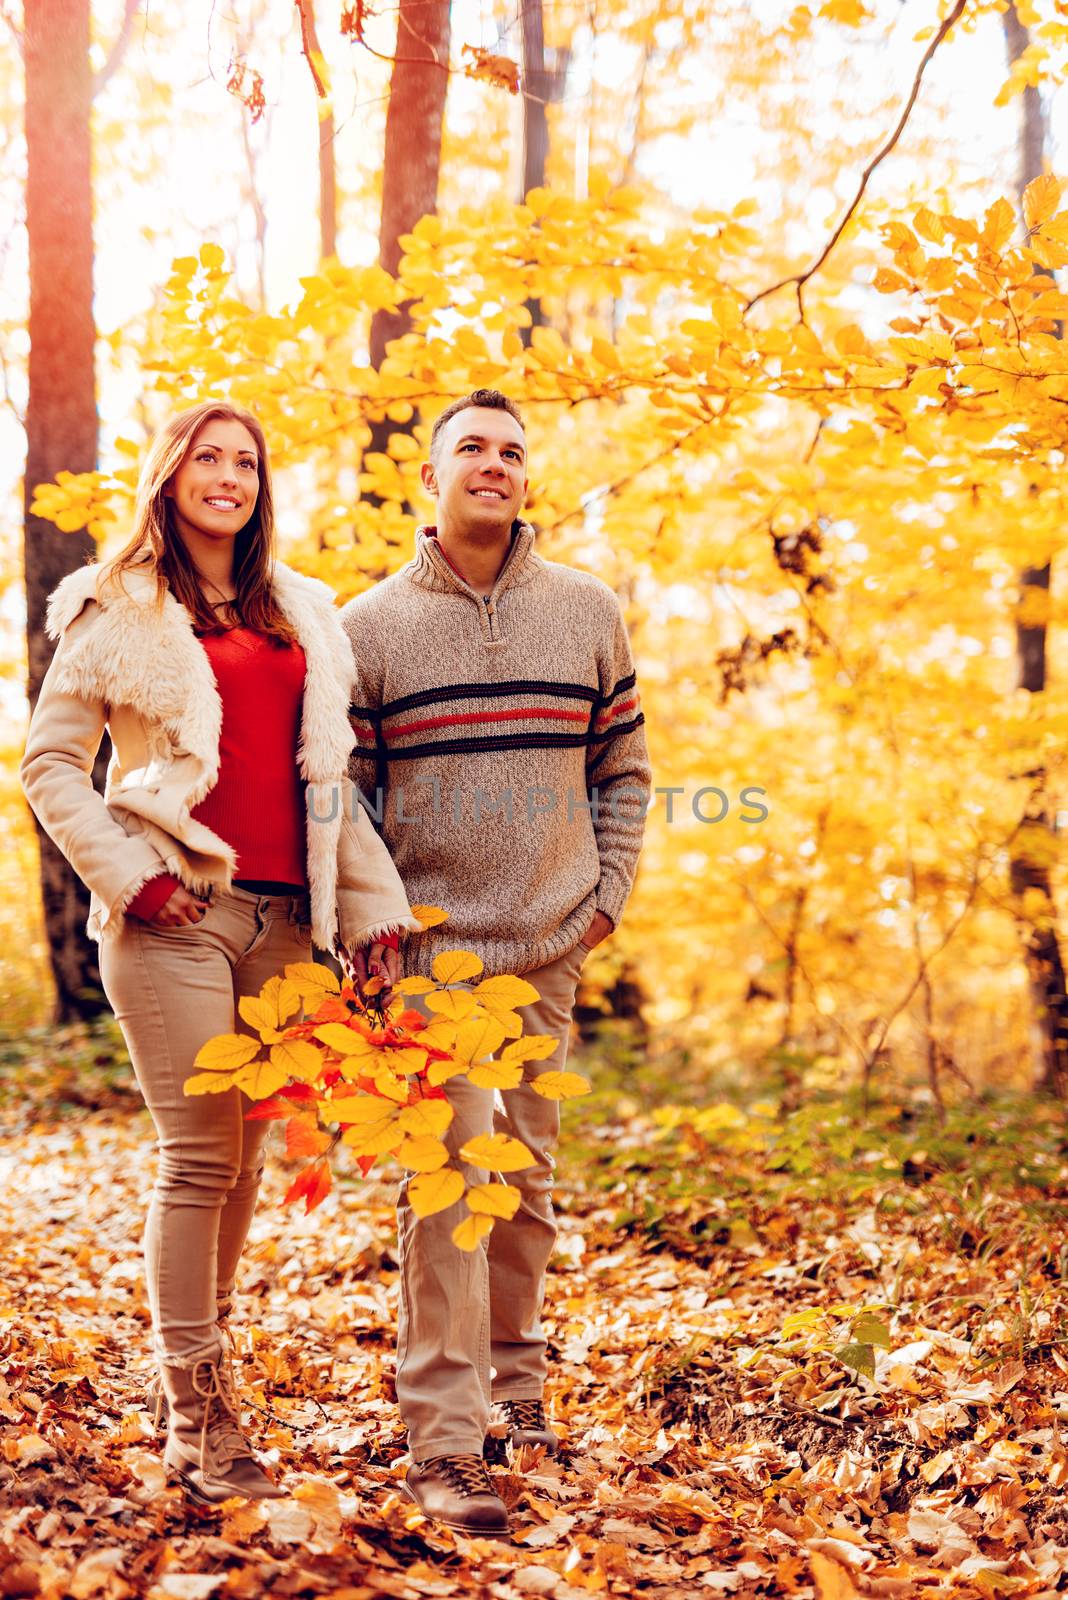 Beautiful smiling couple walking in sunny forest in autumn colors.